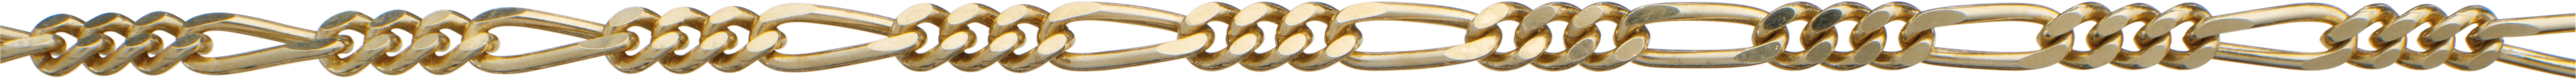 Figaro chain gold 585/-Gg 2.65mm, wire thickness 0.80mm